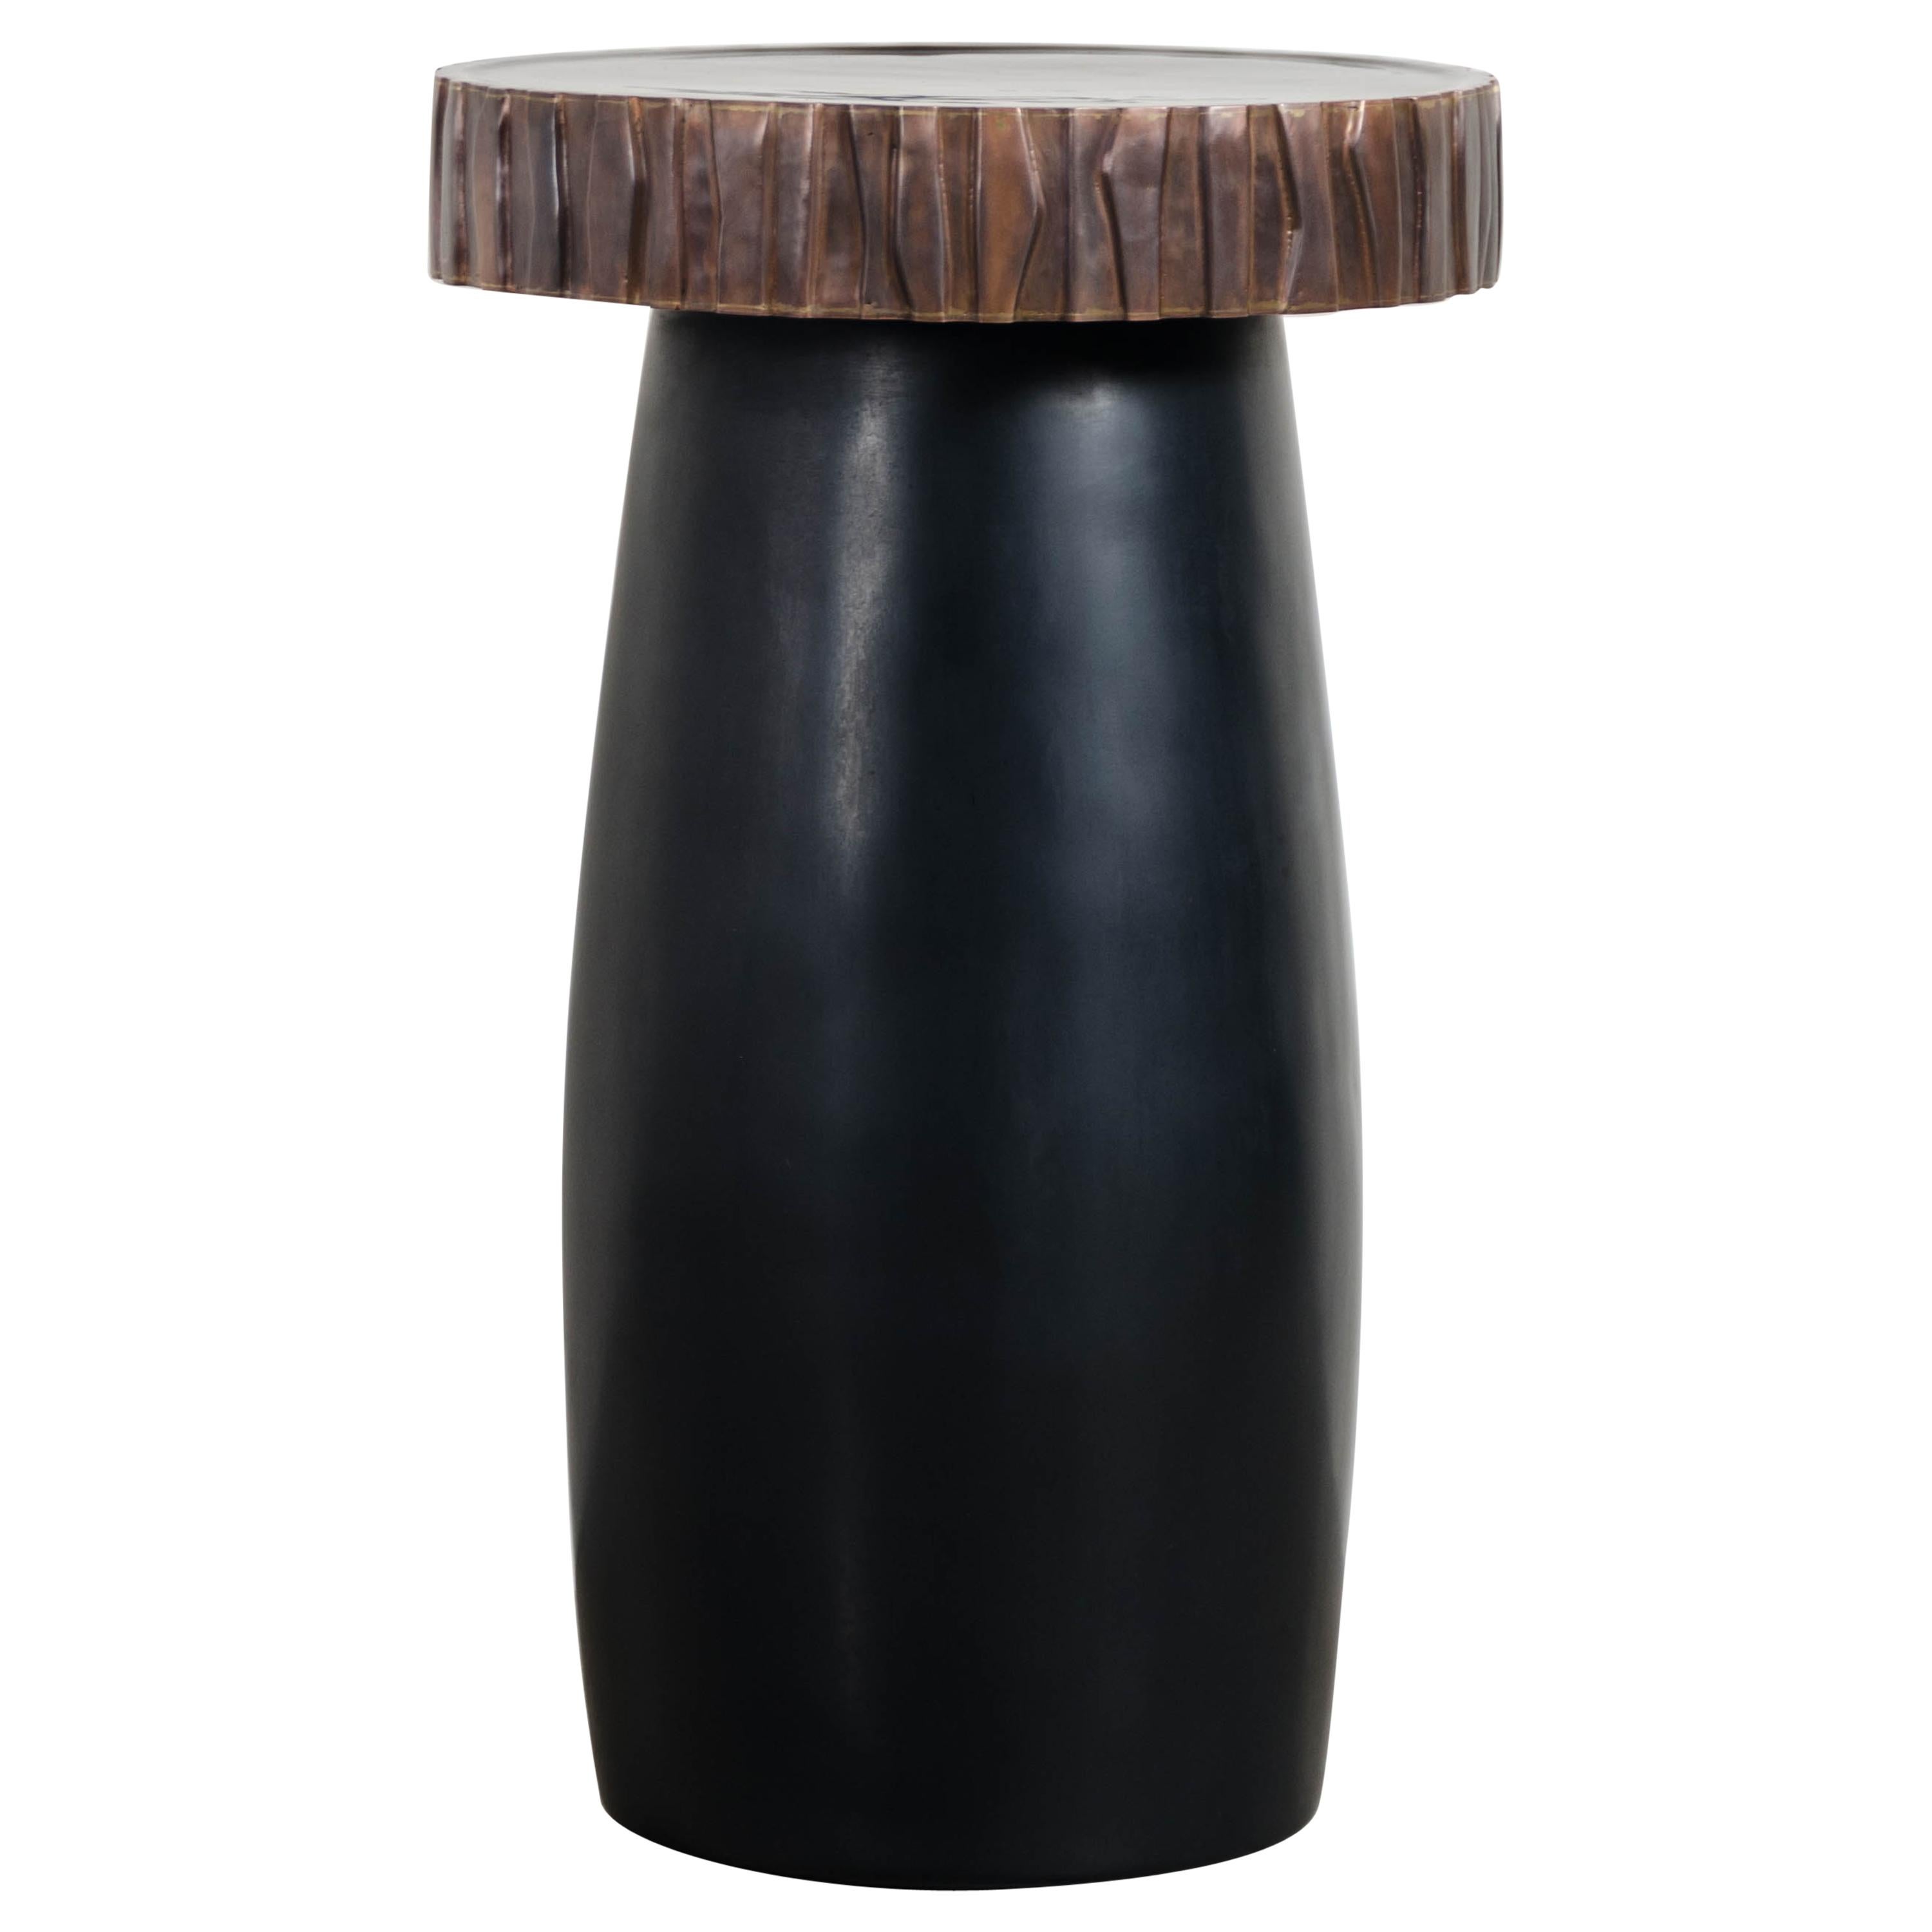 Black Lacquer Side Table with Kuai Trim by Robert Kuo, Hand Repousse, Limited